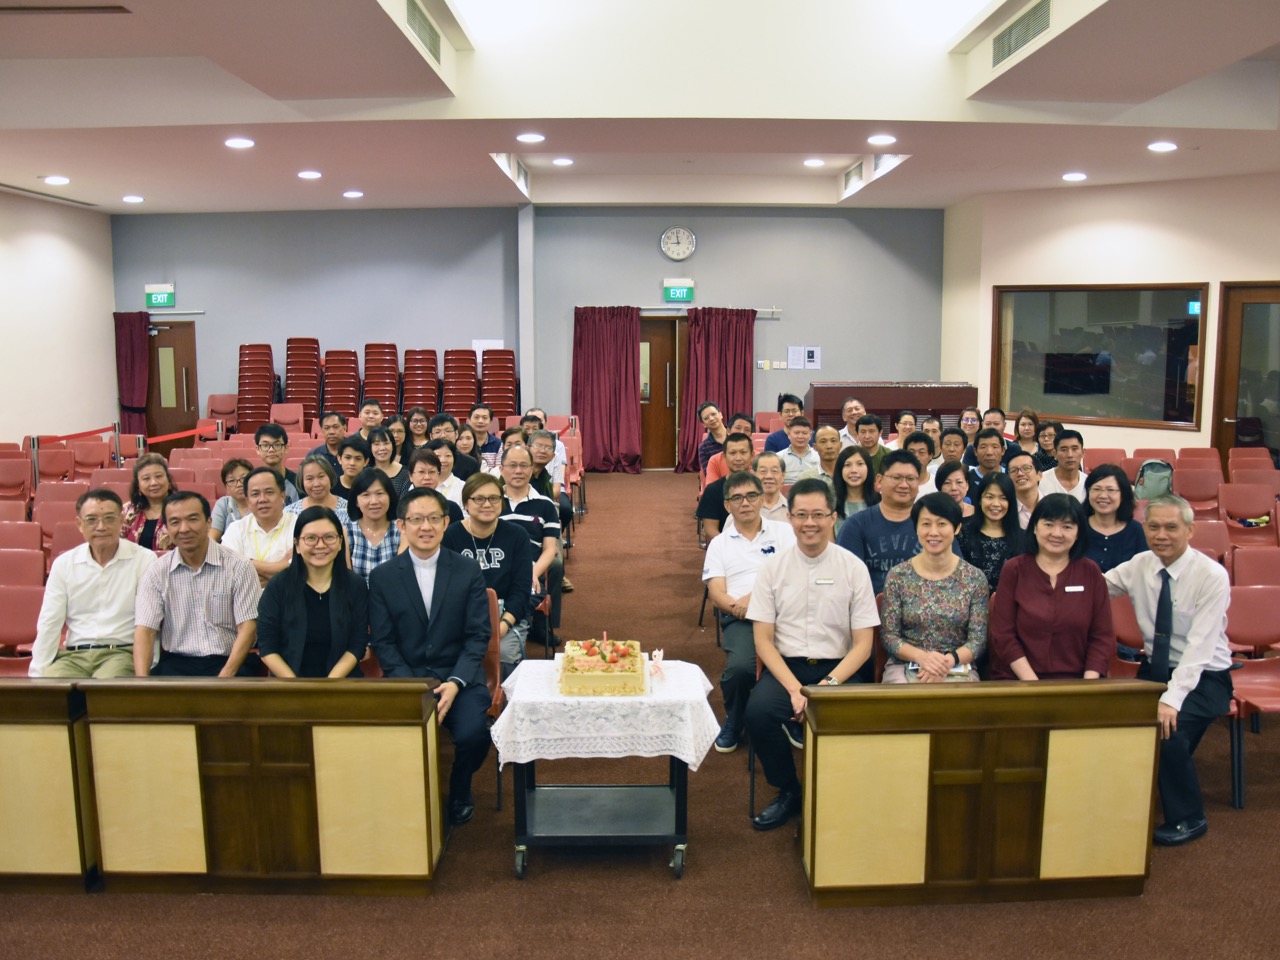 You are welcome to join us at our Mandarin Evening Service. Sundays, 7.00pm.